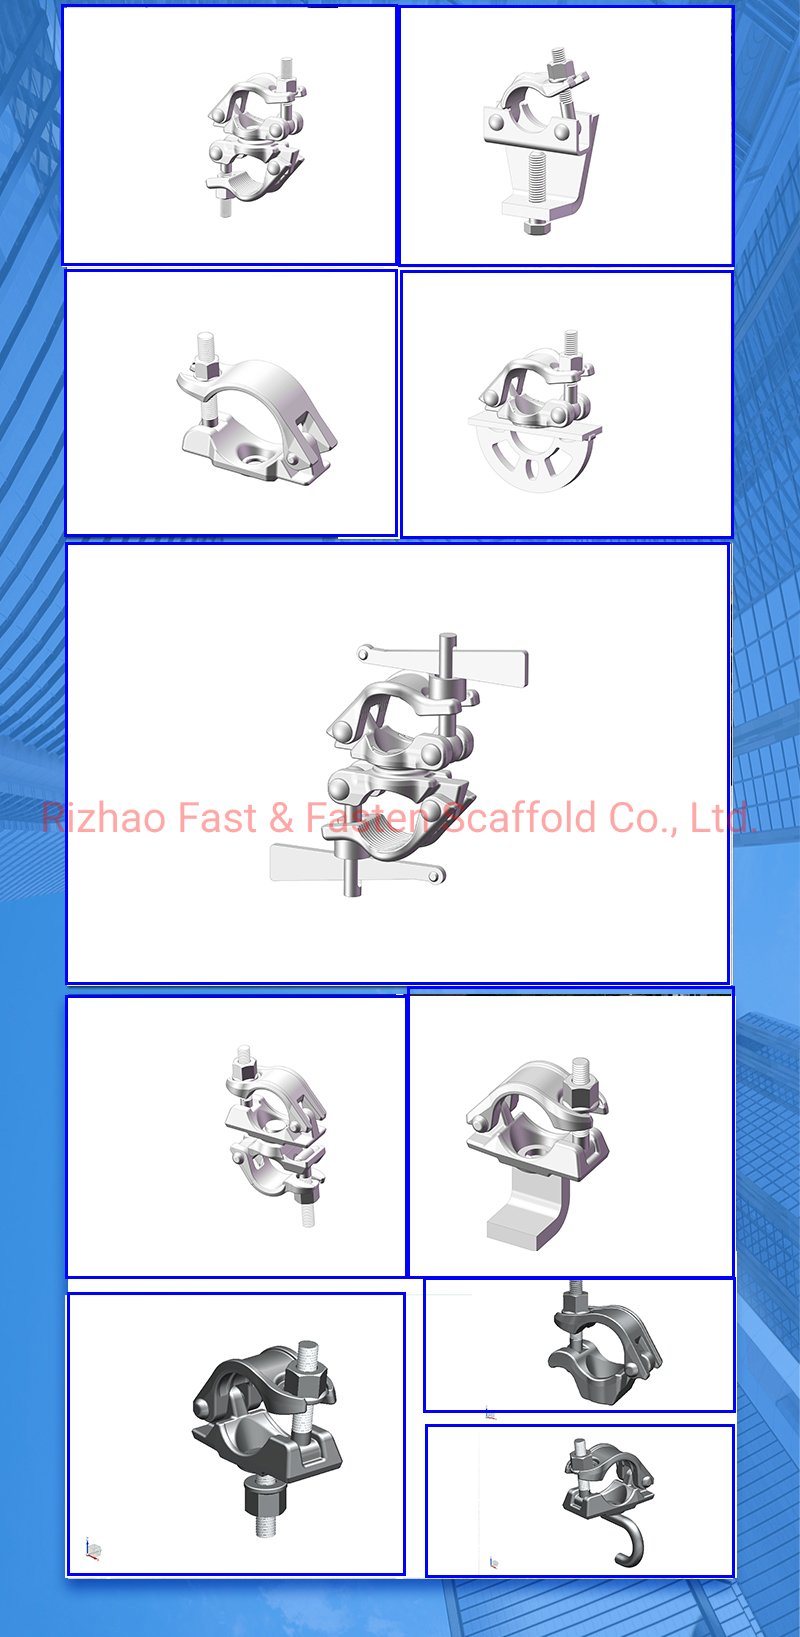 Scaffold Fastener /Pipe Clamp/ Fixed and Rotating Galvanised Scaffold Swivel Coupler